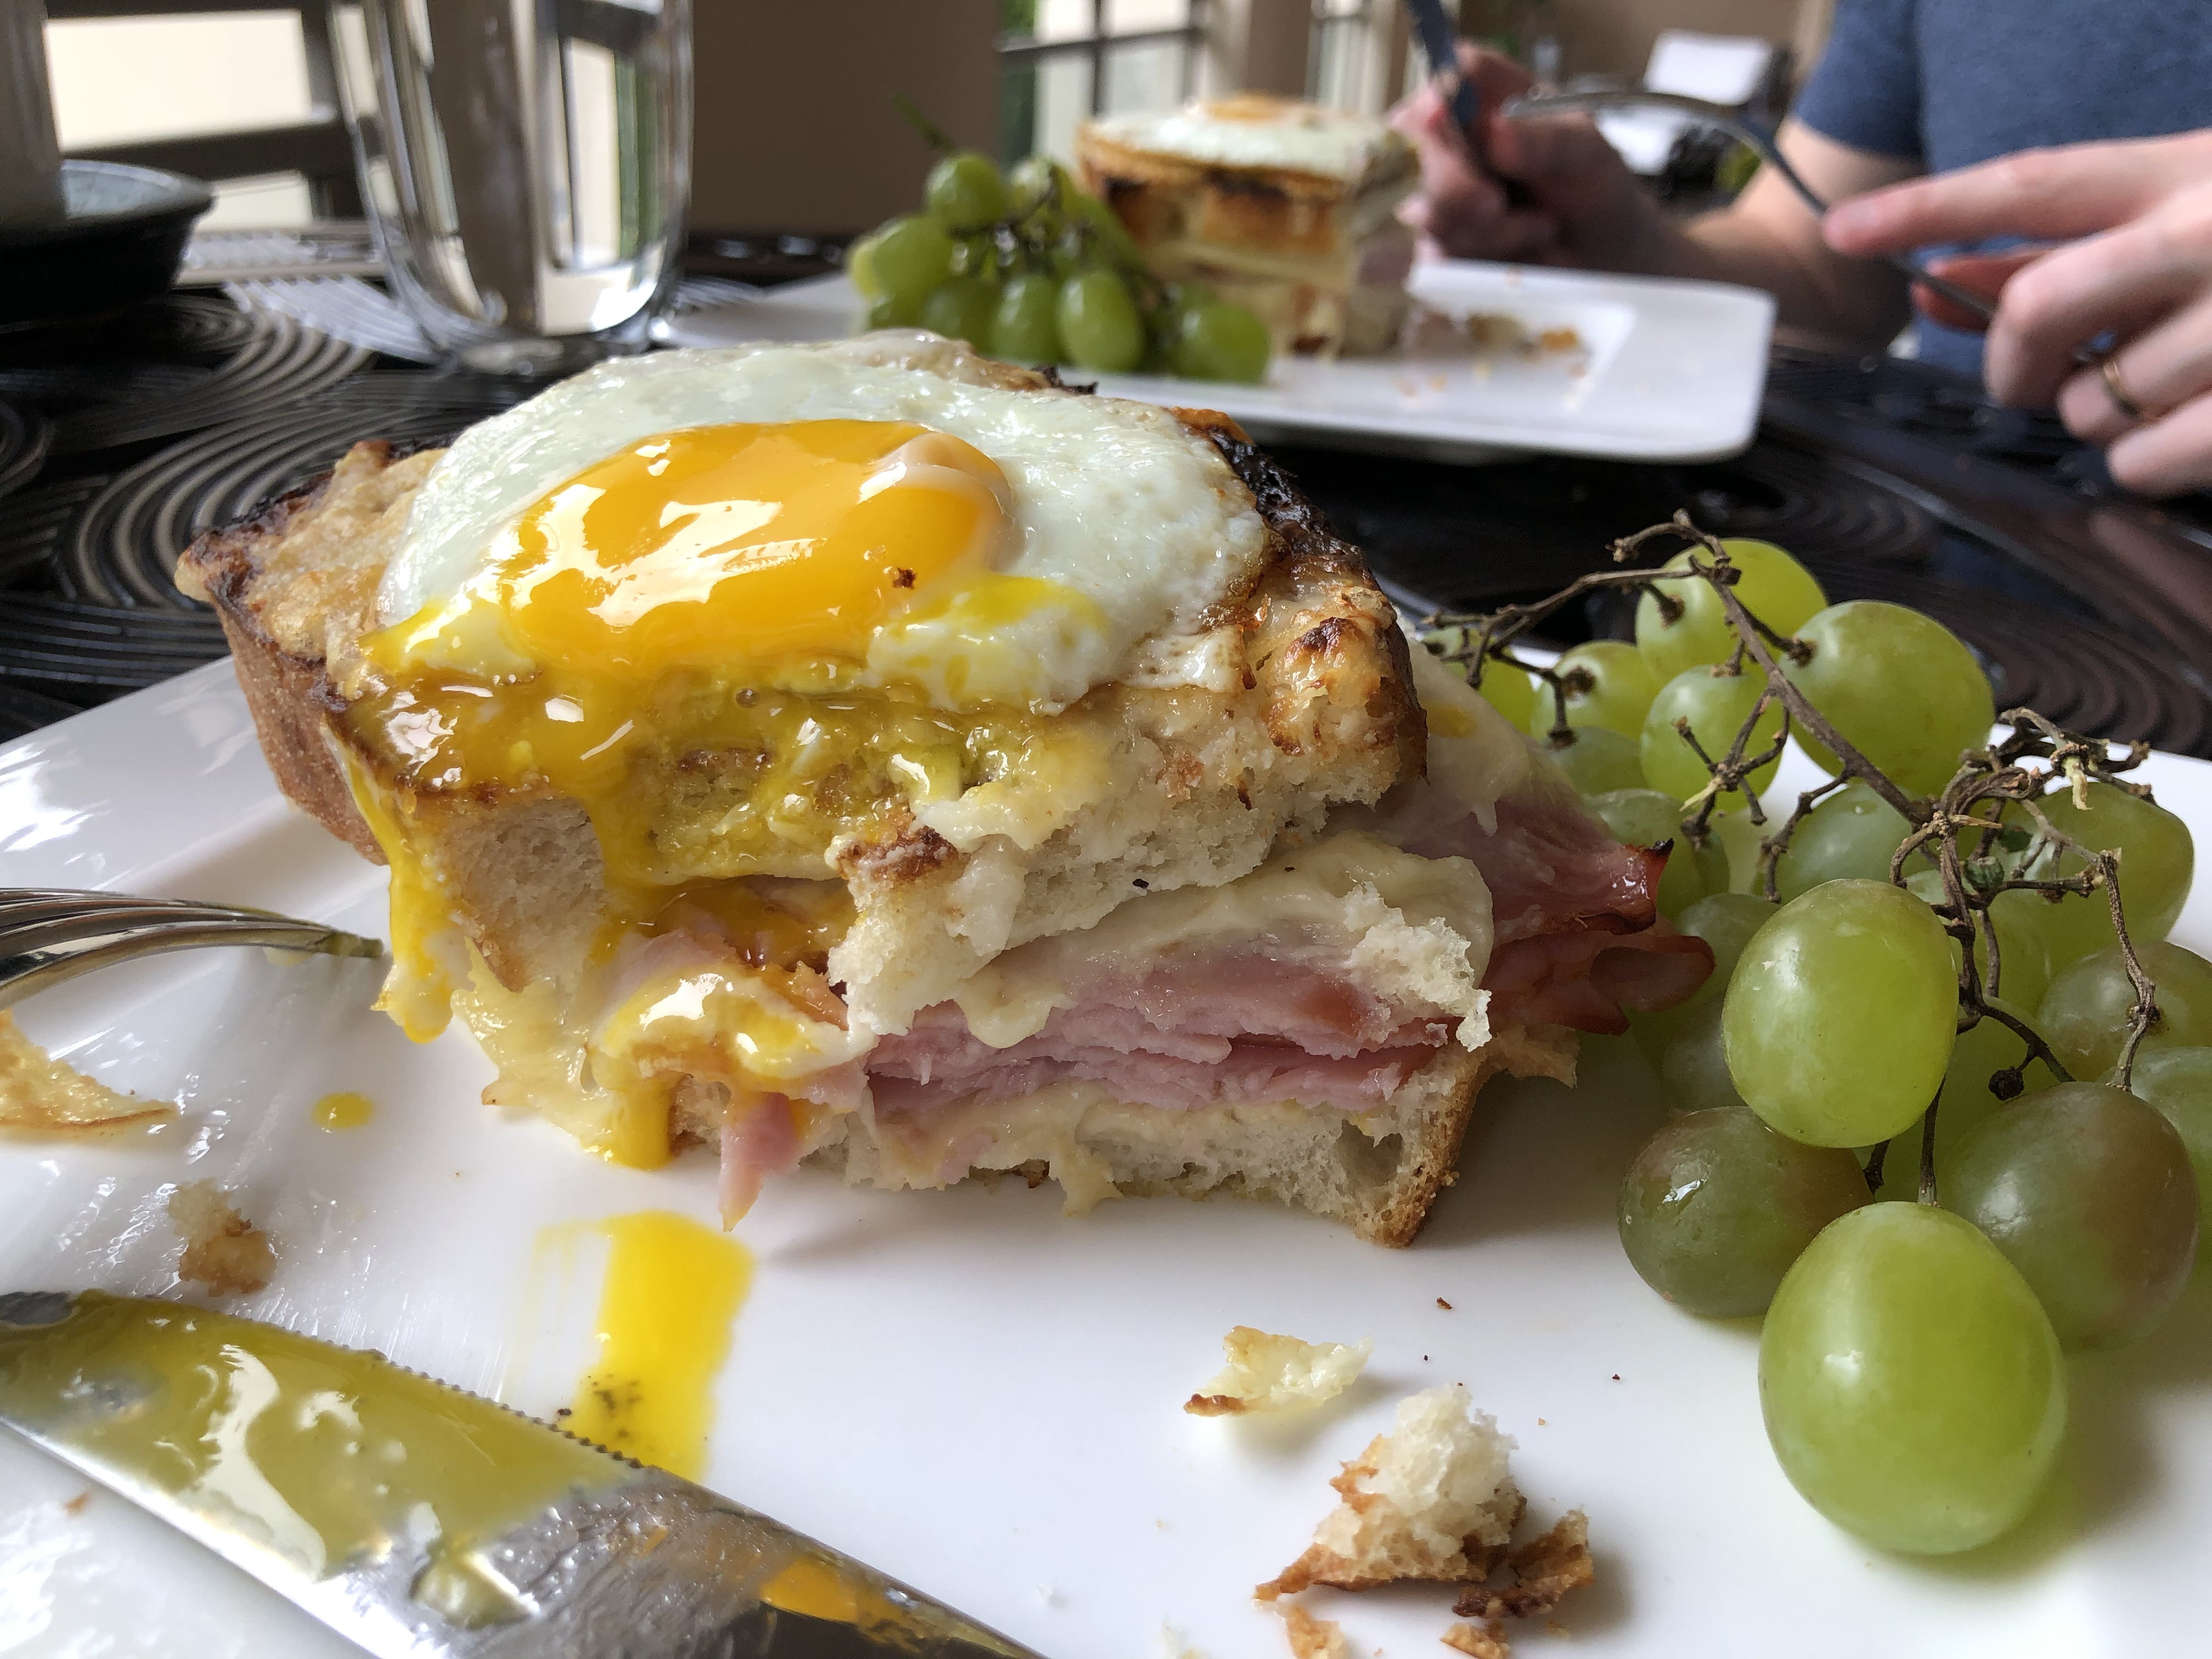 Aaron Made Croque Madame Sandwiches for Brunch Close-Up with Broken Egg